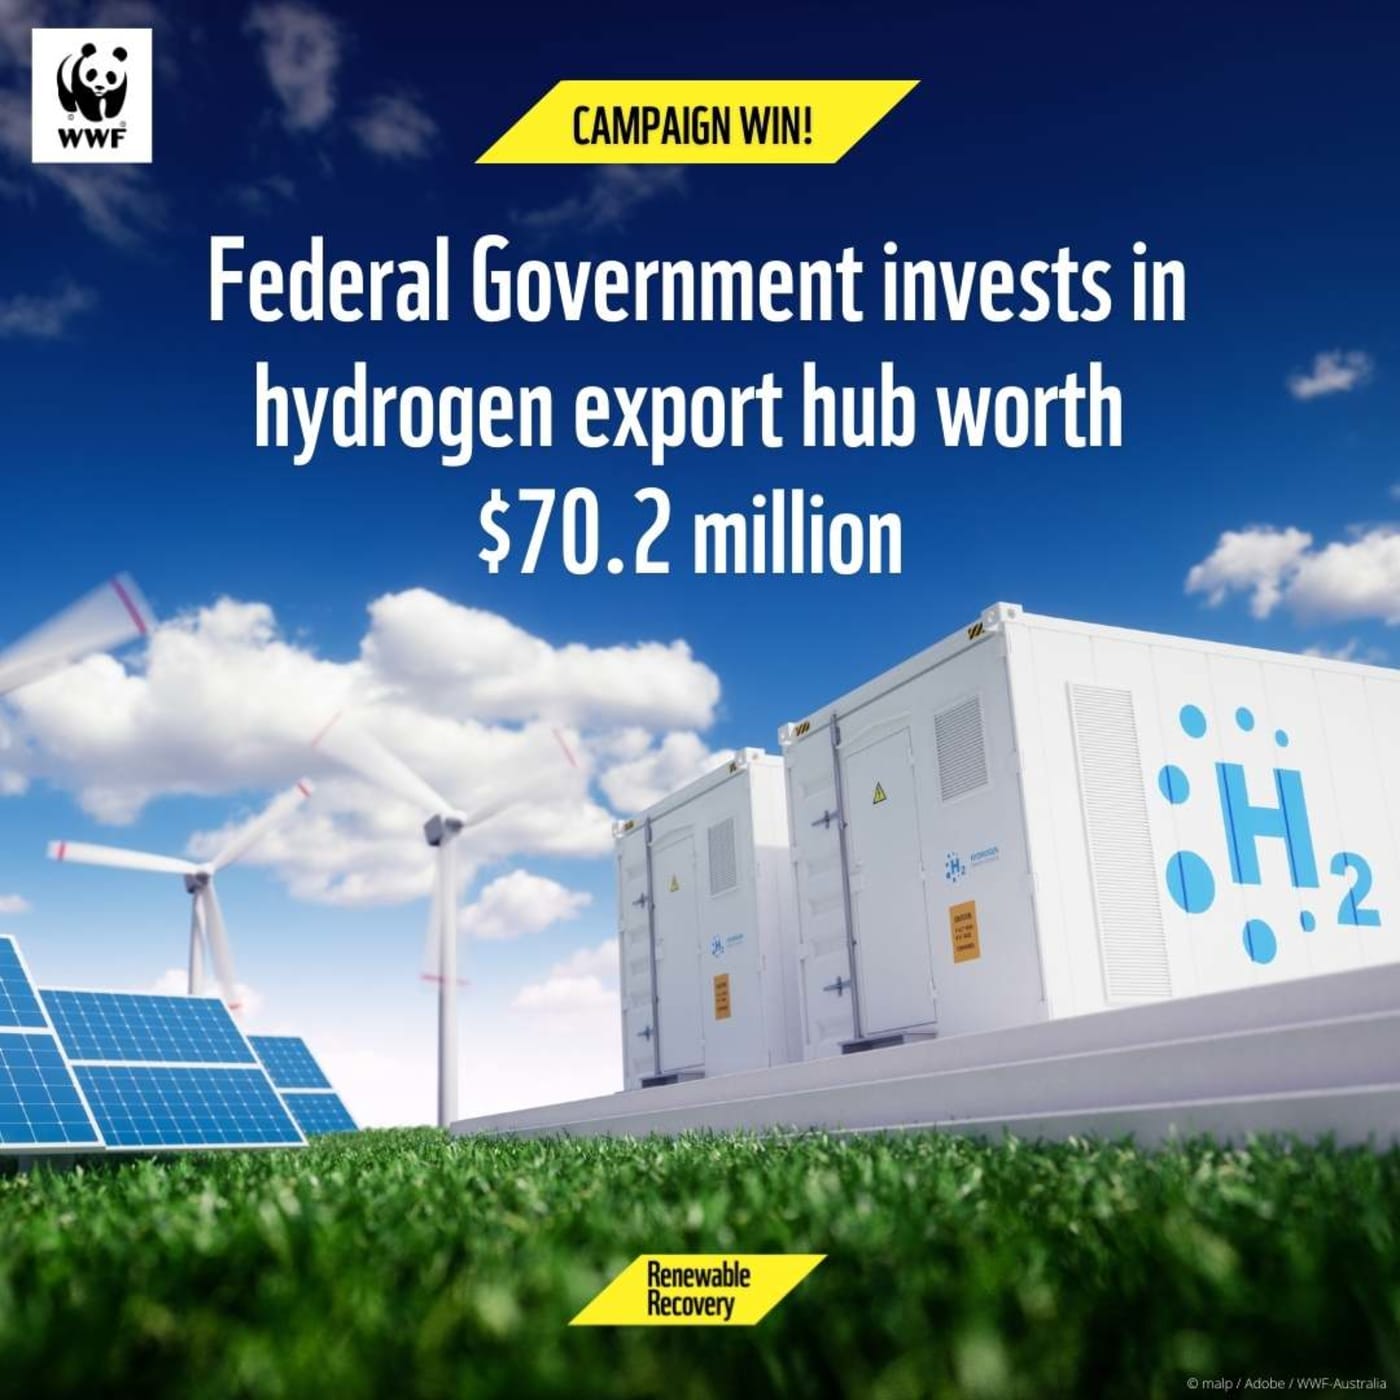 Federal Government invests in hydrogen export hub